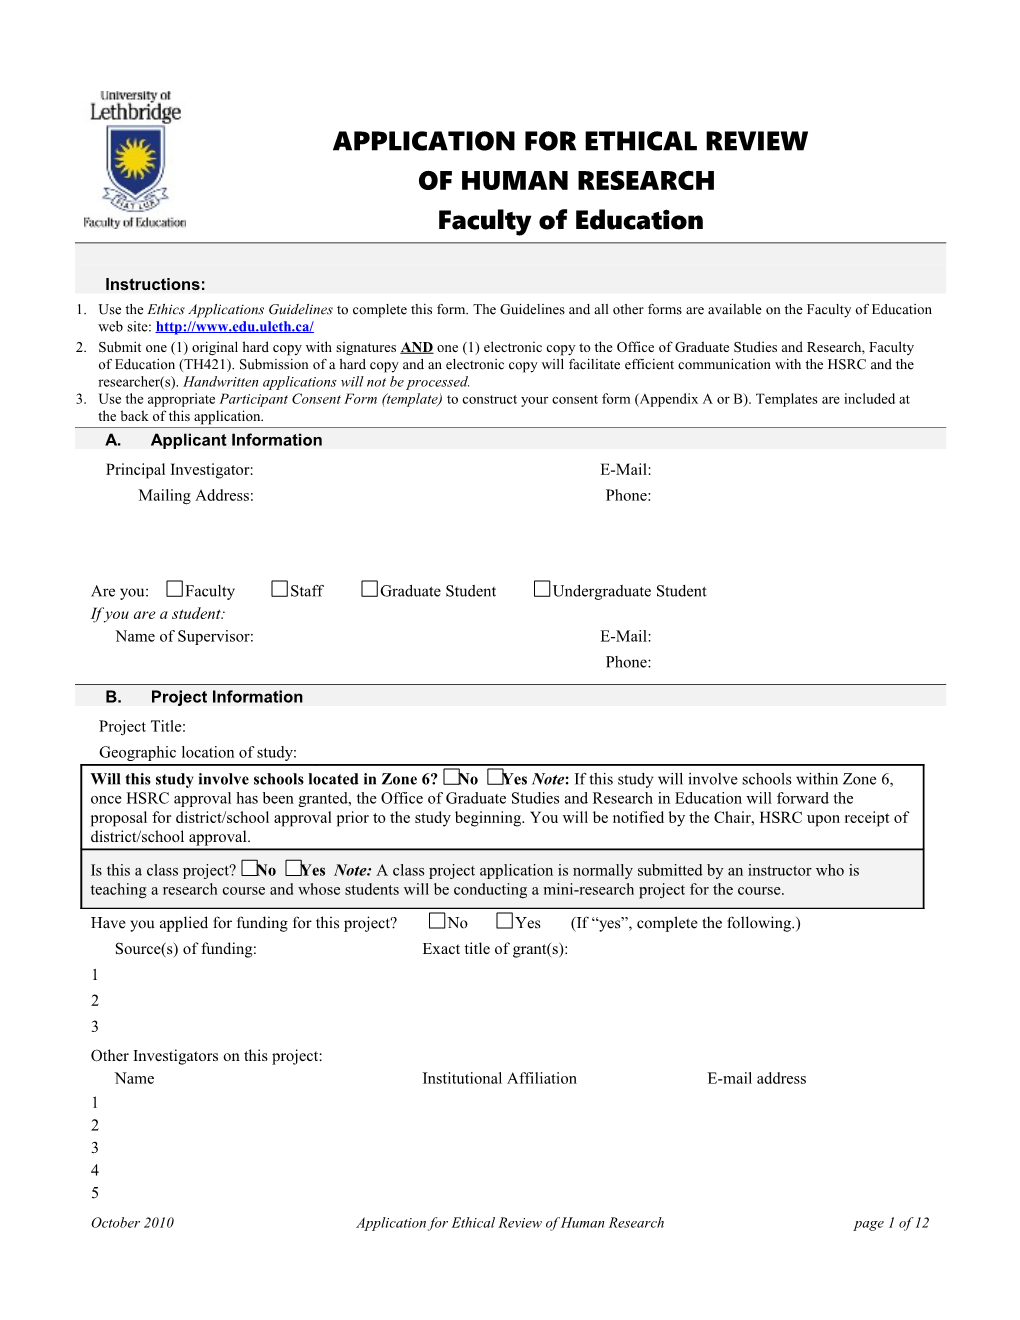 Application for Ethical Review of Human Research